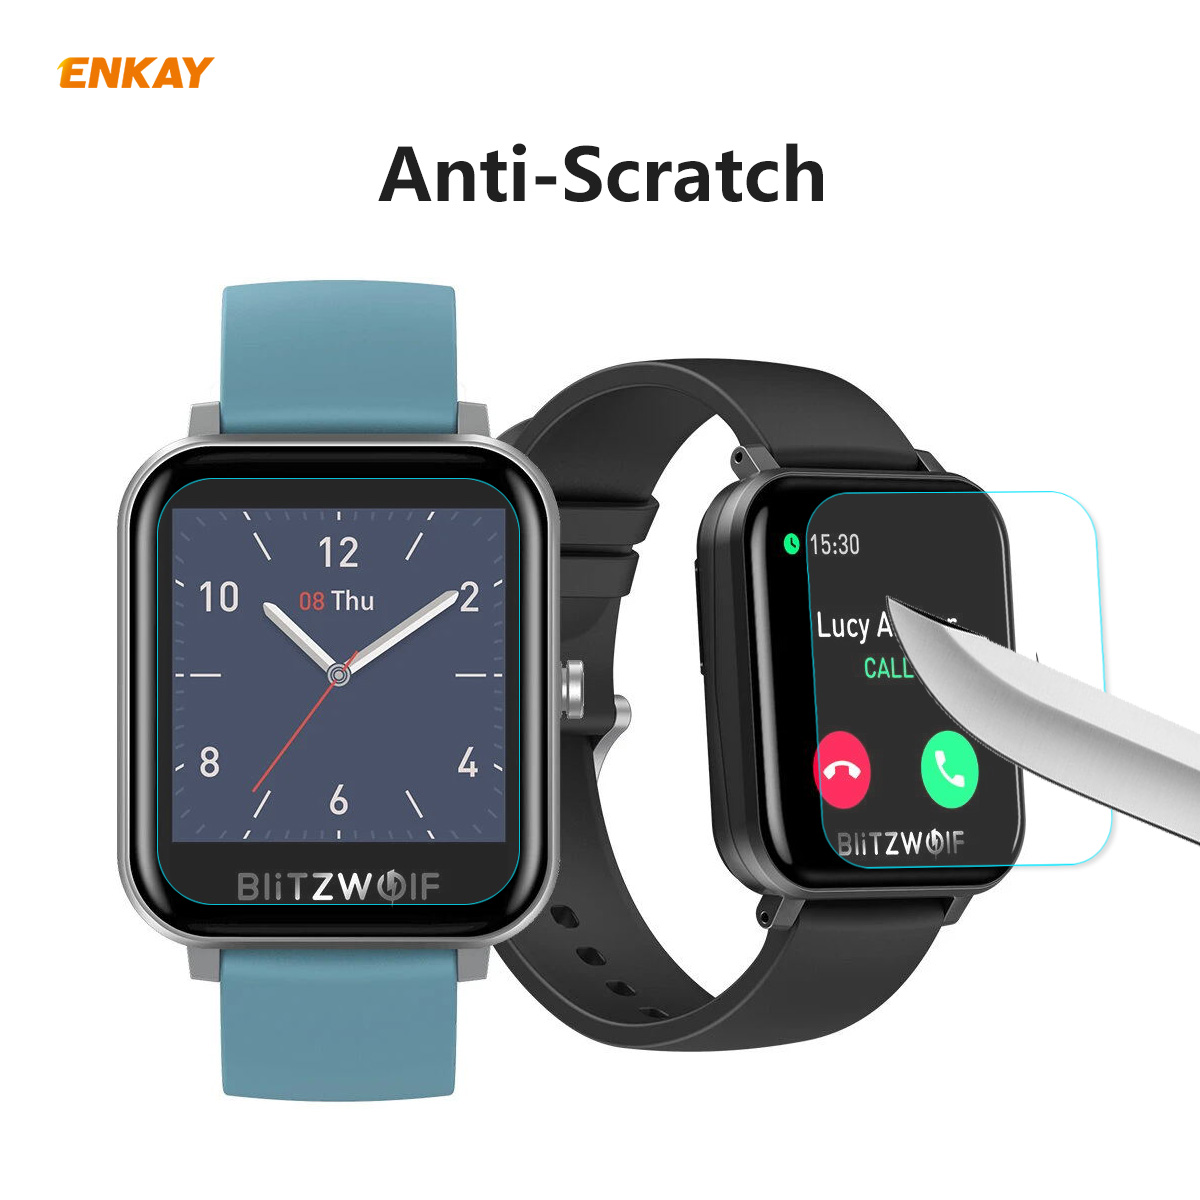 ENKAY-02mm-9H-215D-Are-Edge-Tempered-Glass-Protective-Film-Watch-Screen-Protector-only-for-BlitzWolf-1789630-1